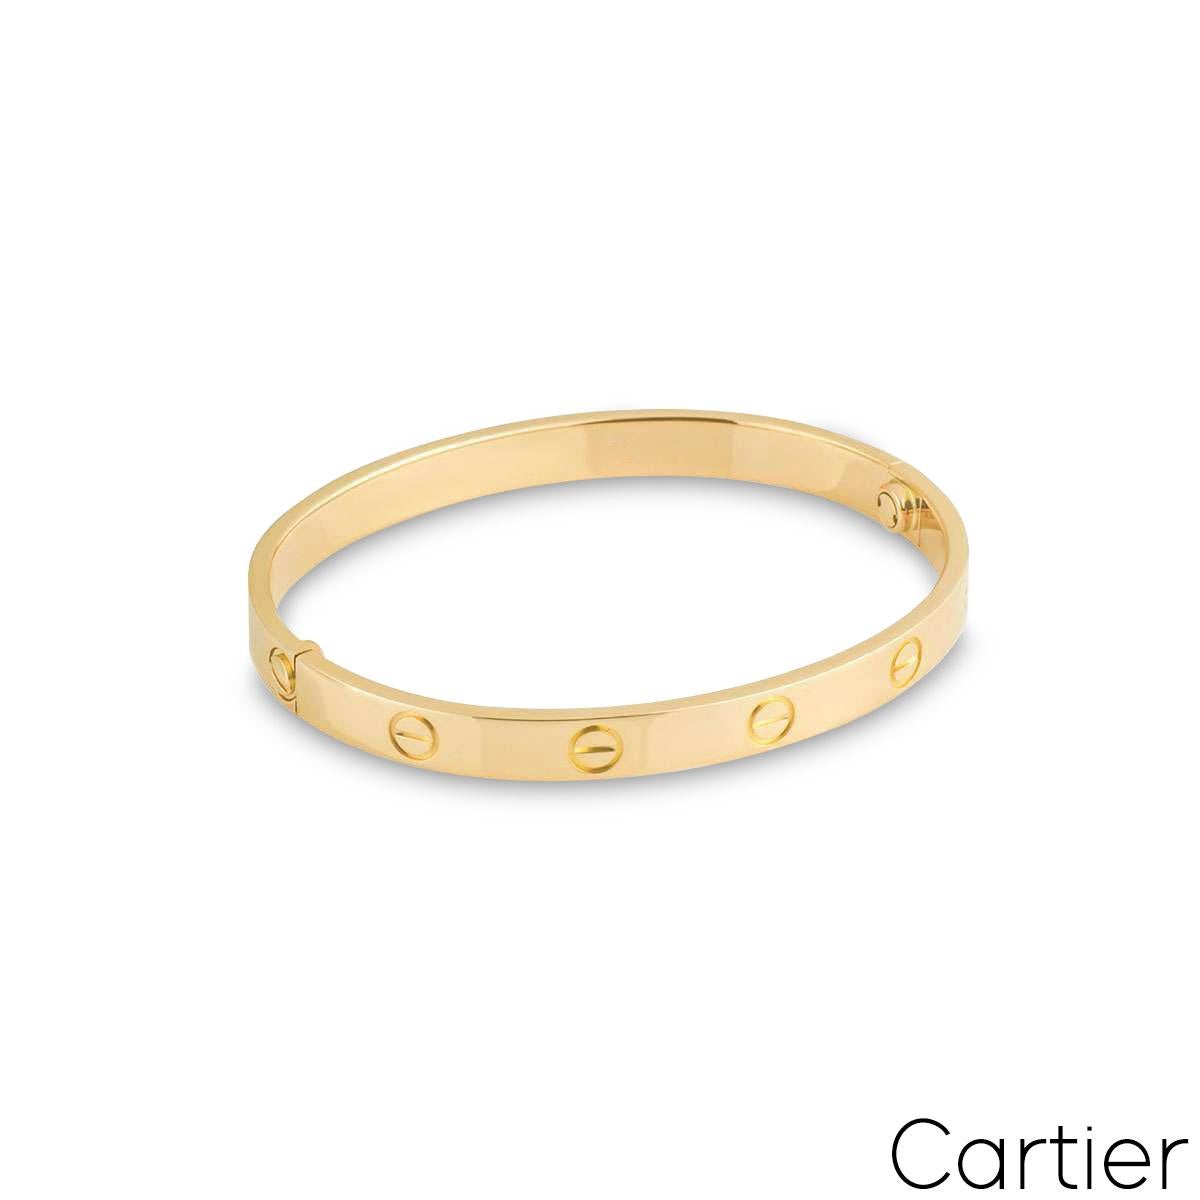 Cartier Yellow Gold Plain Love Bracelet Size 21 B6035521 In Excellent Condition For Sale In London, GB